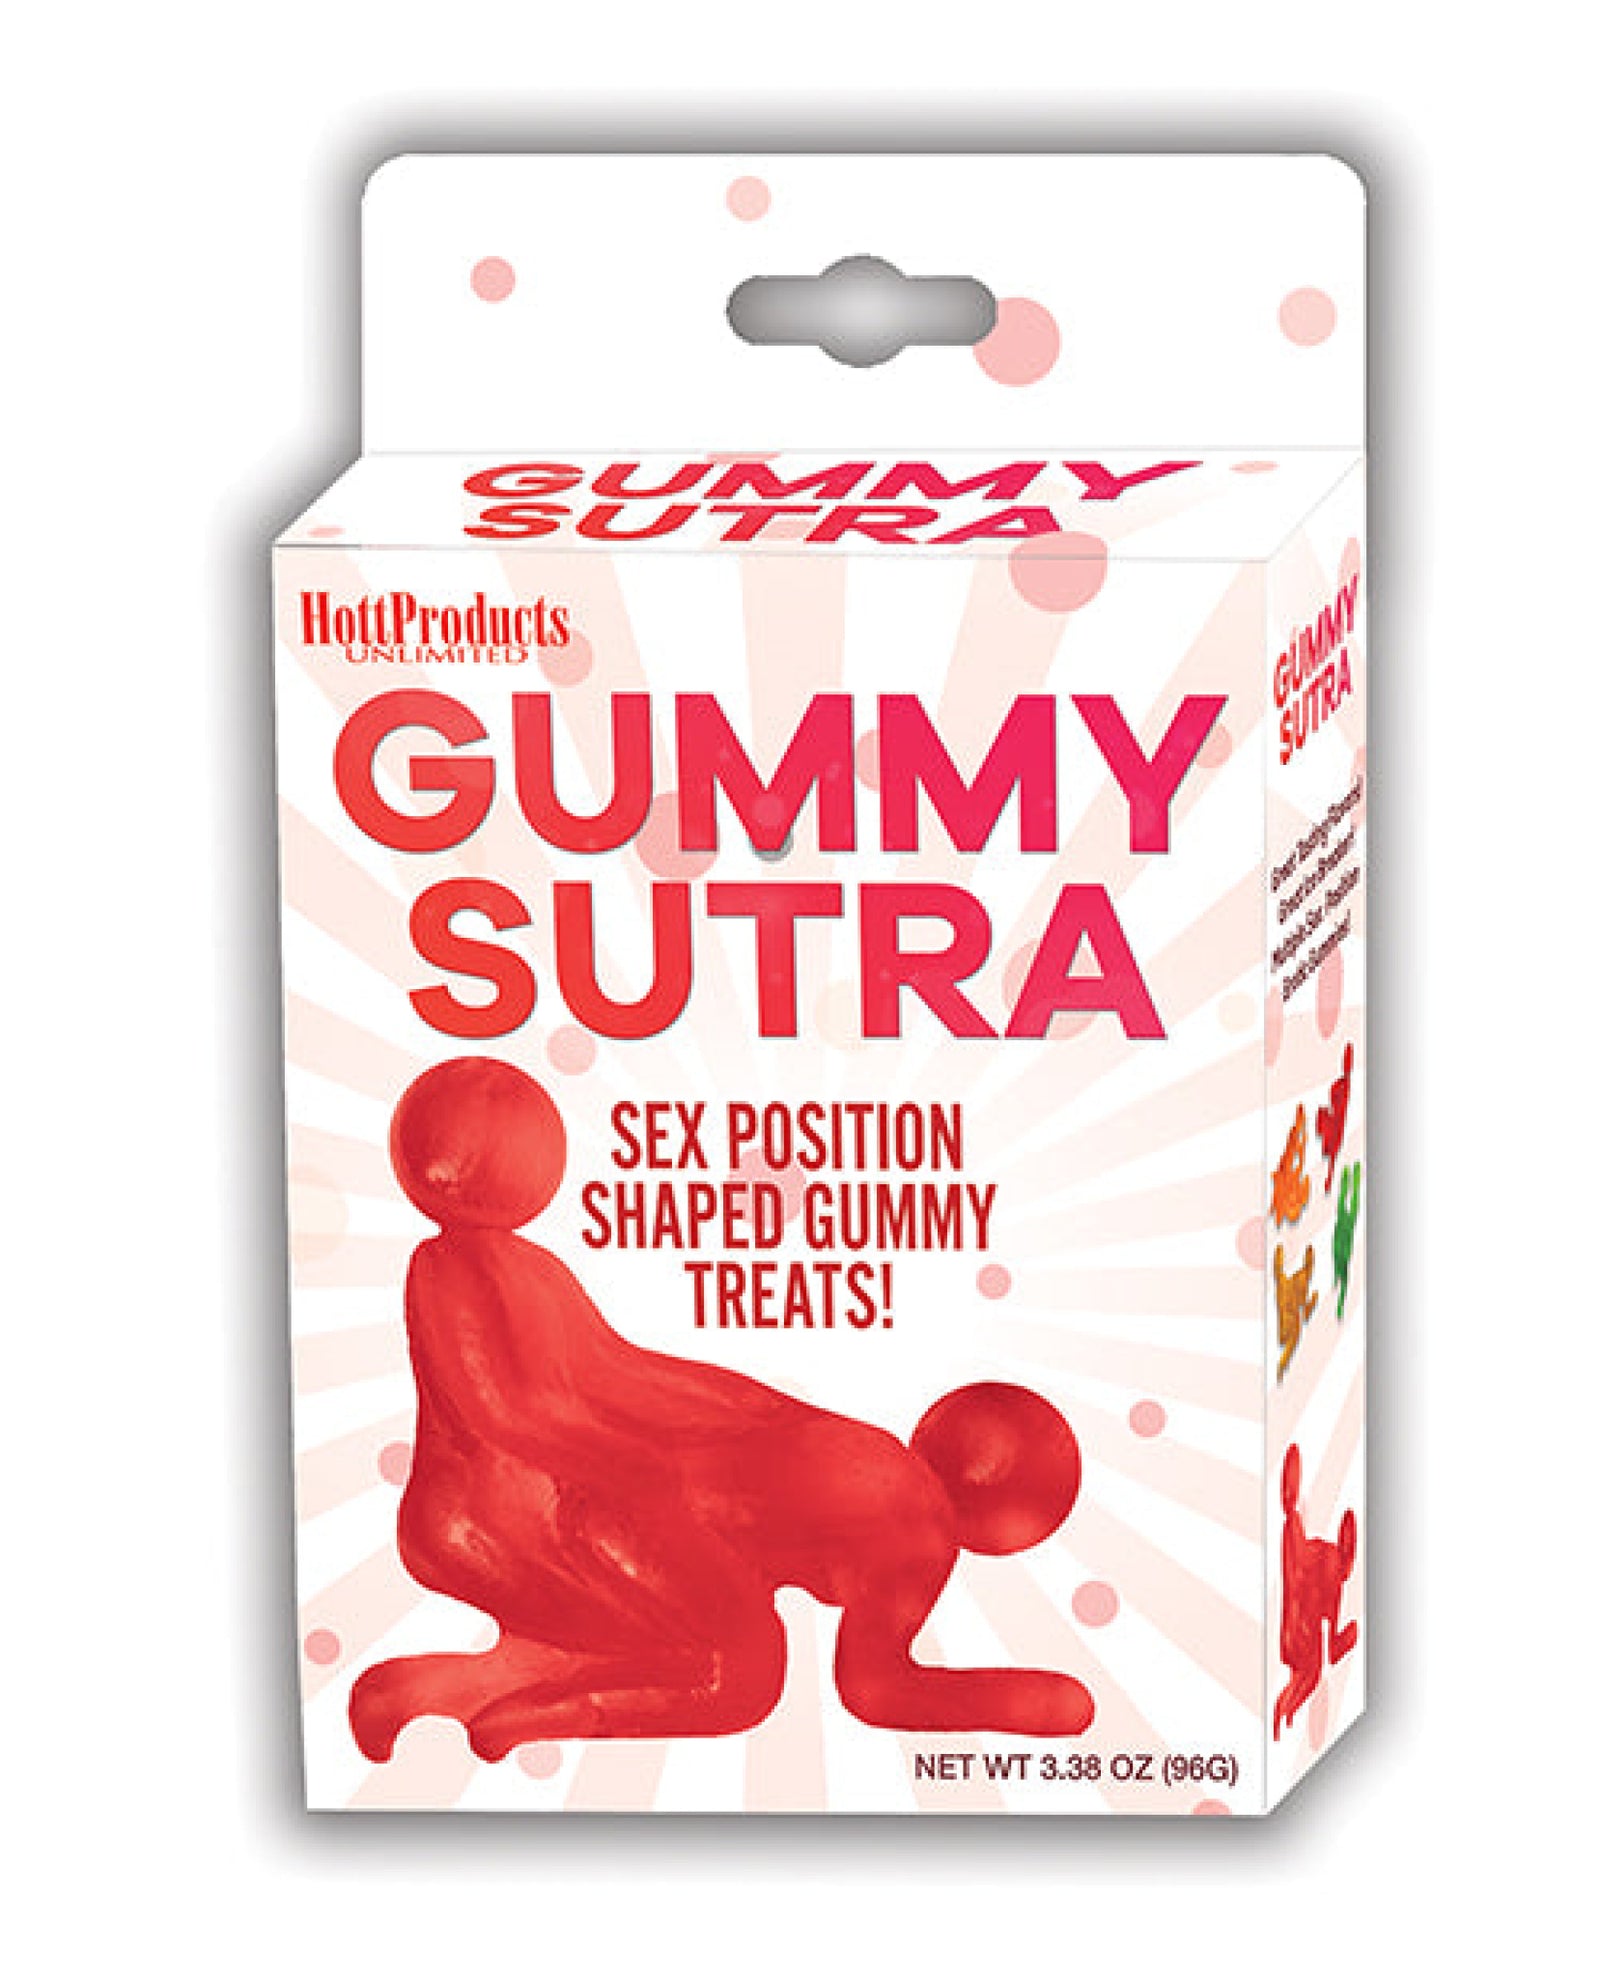 Gummy Sutra Sex Position Gummies - Limited Edition Hang Tab Box Hott Products